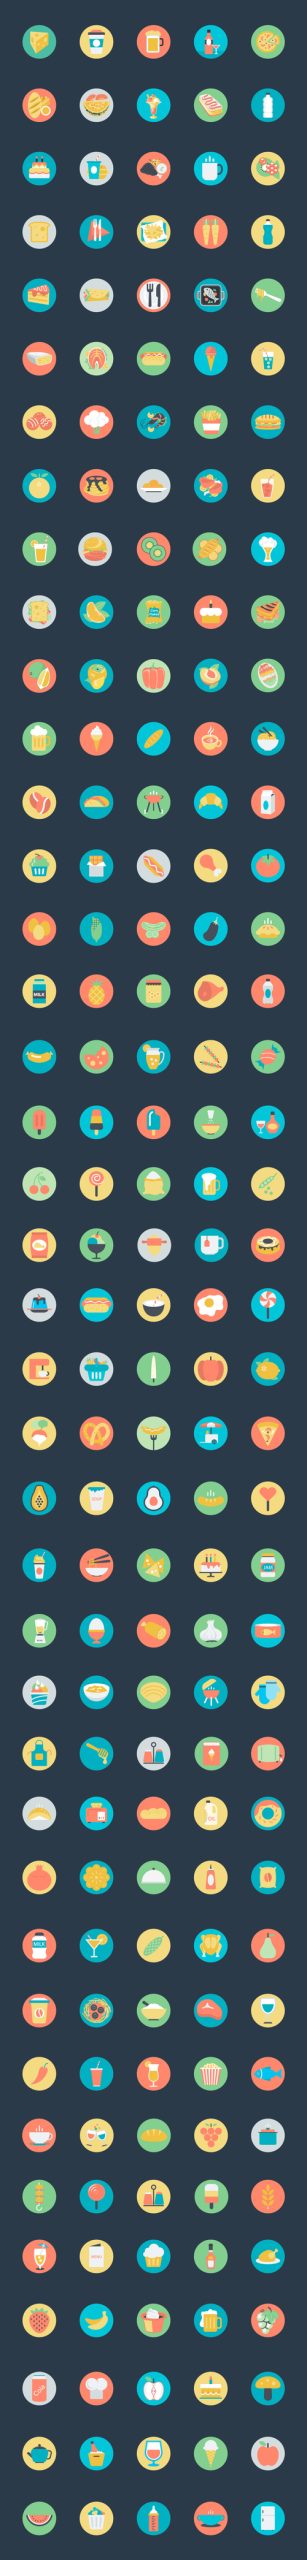 Fast food icon vector